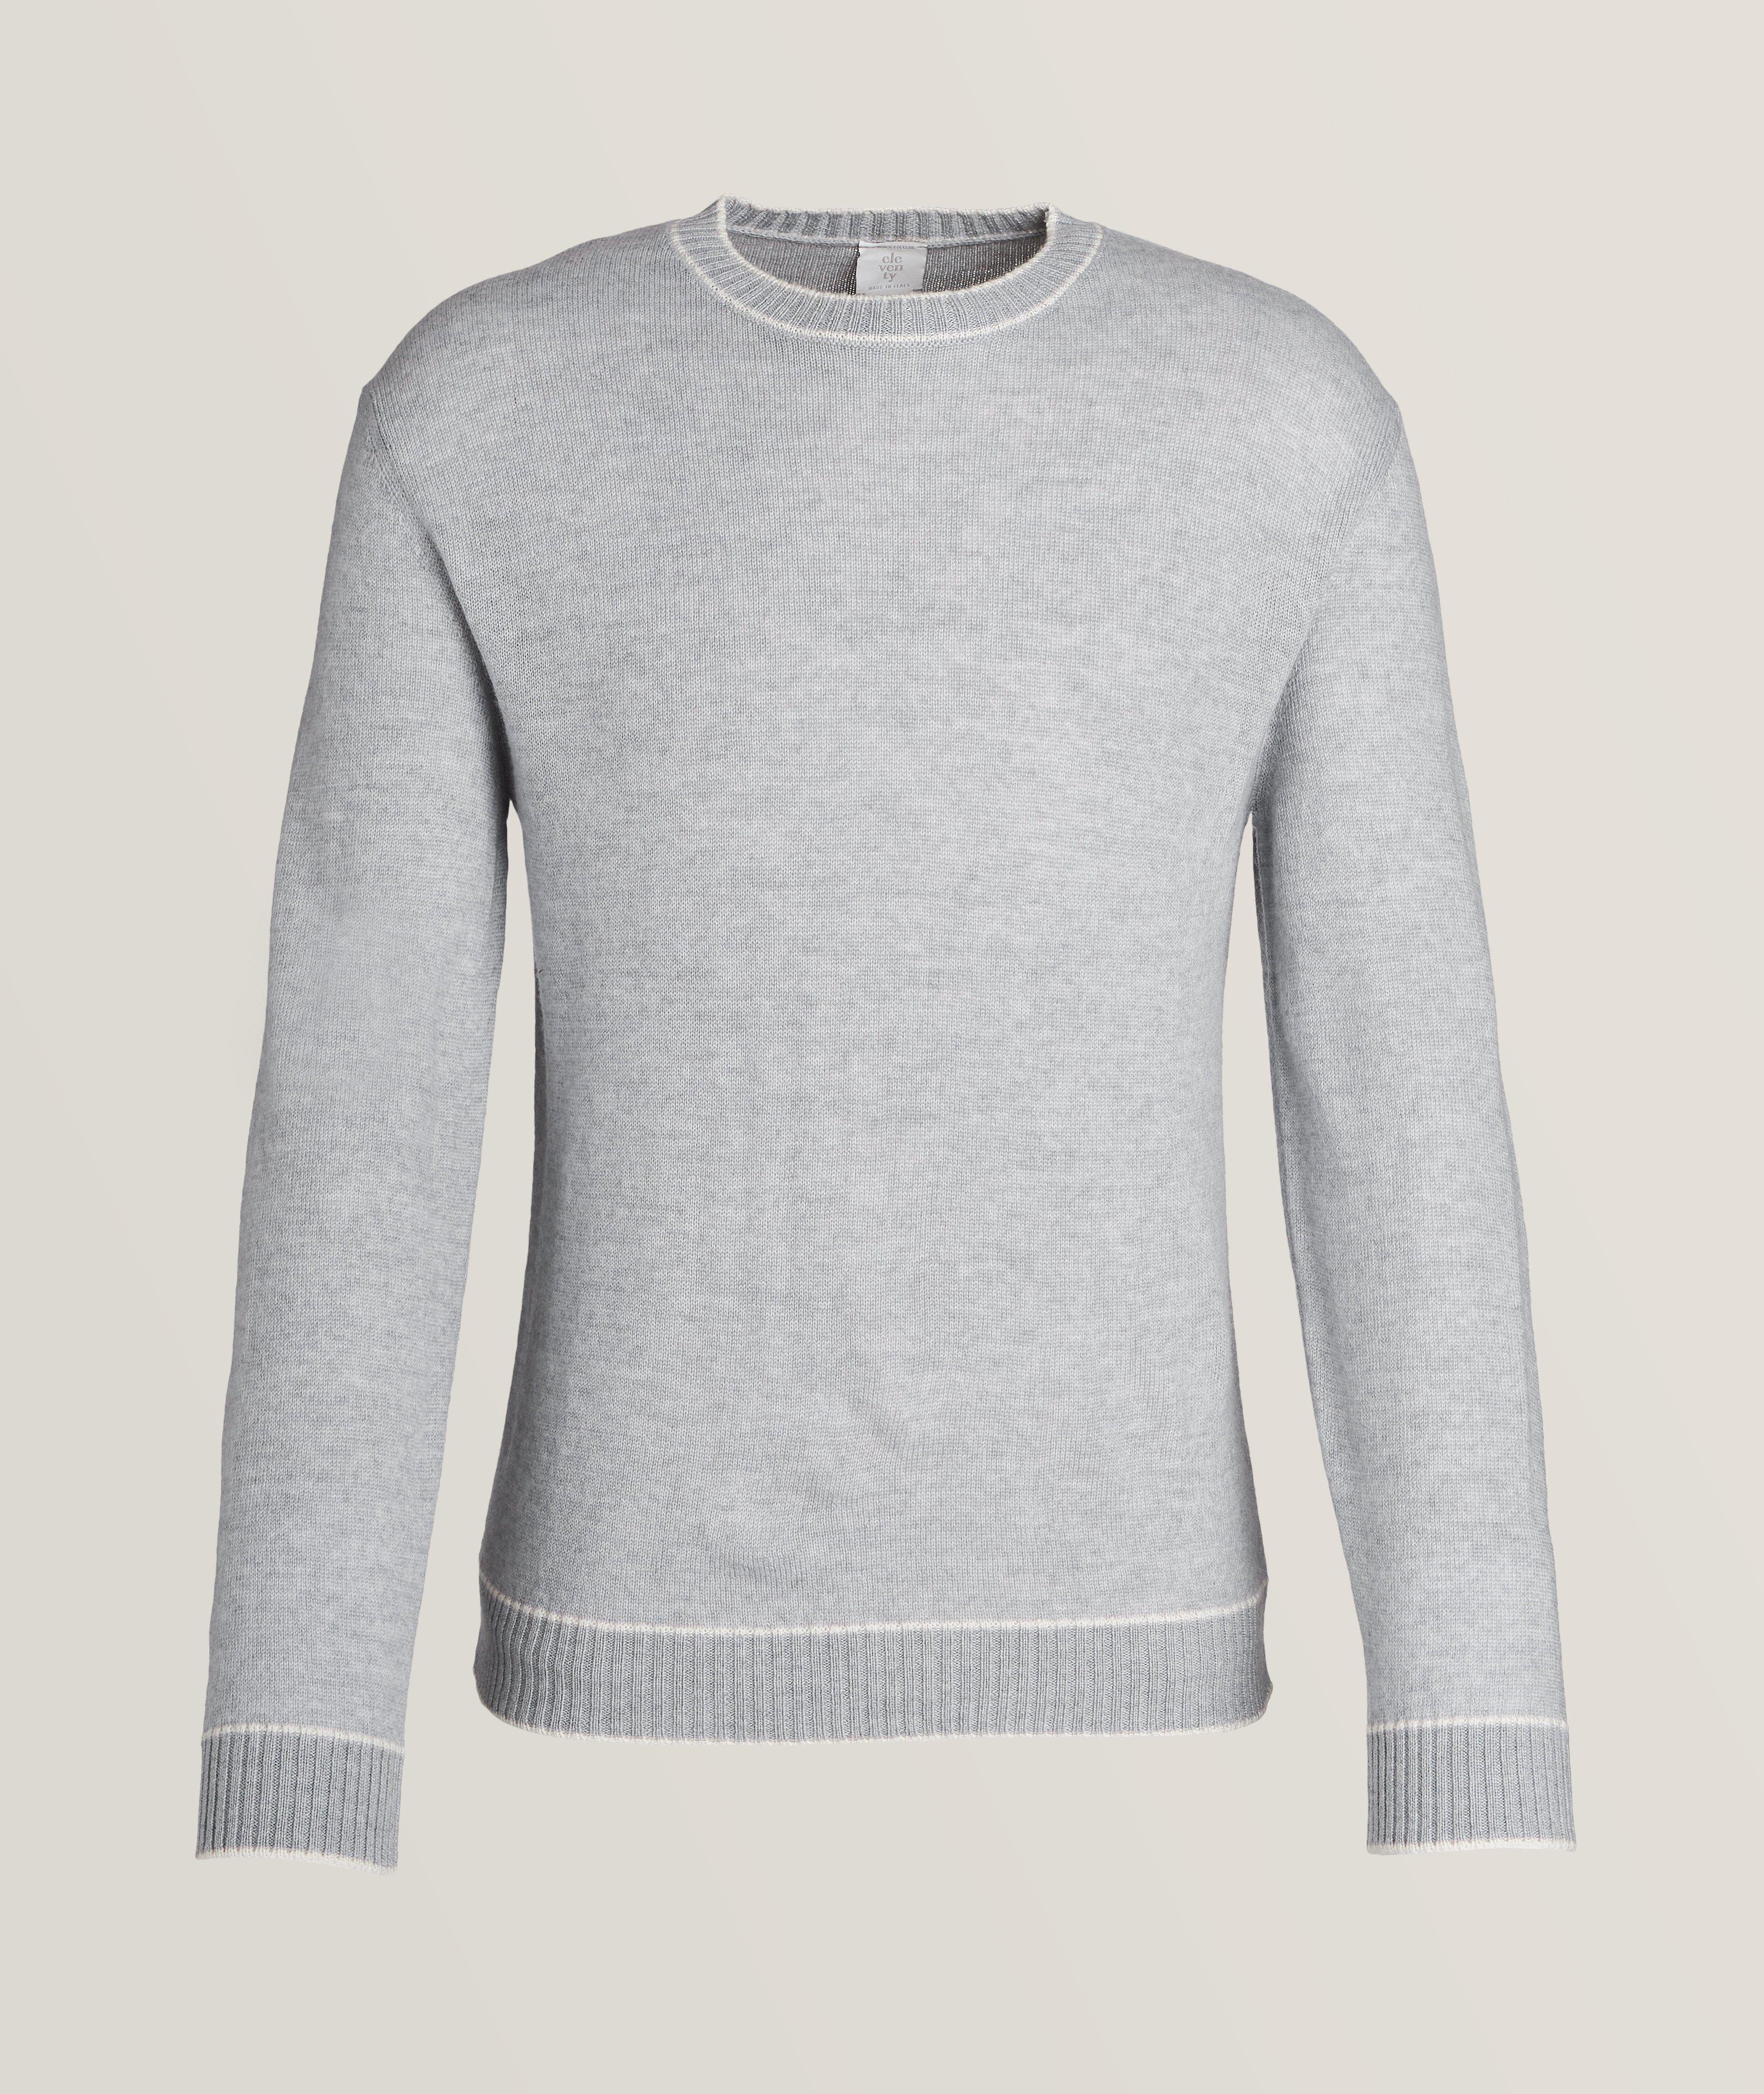 Contrast Trimmed Wool Crewneck Sweater  image 0